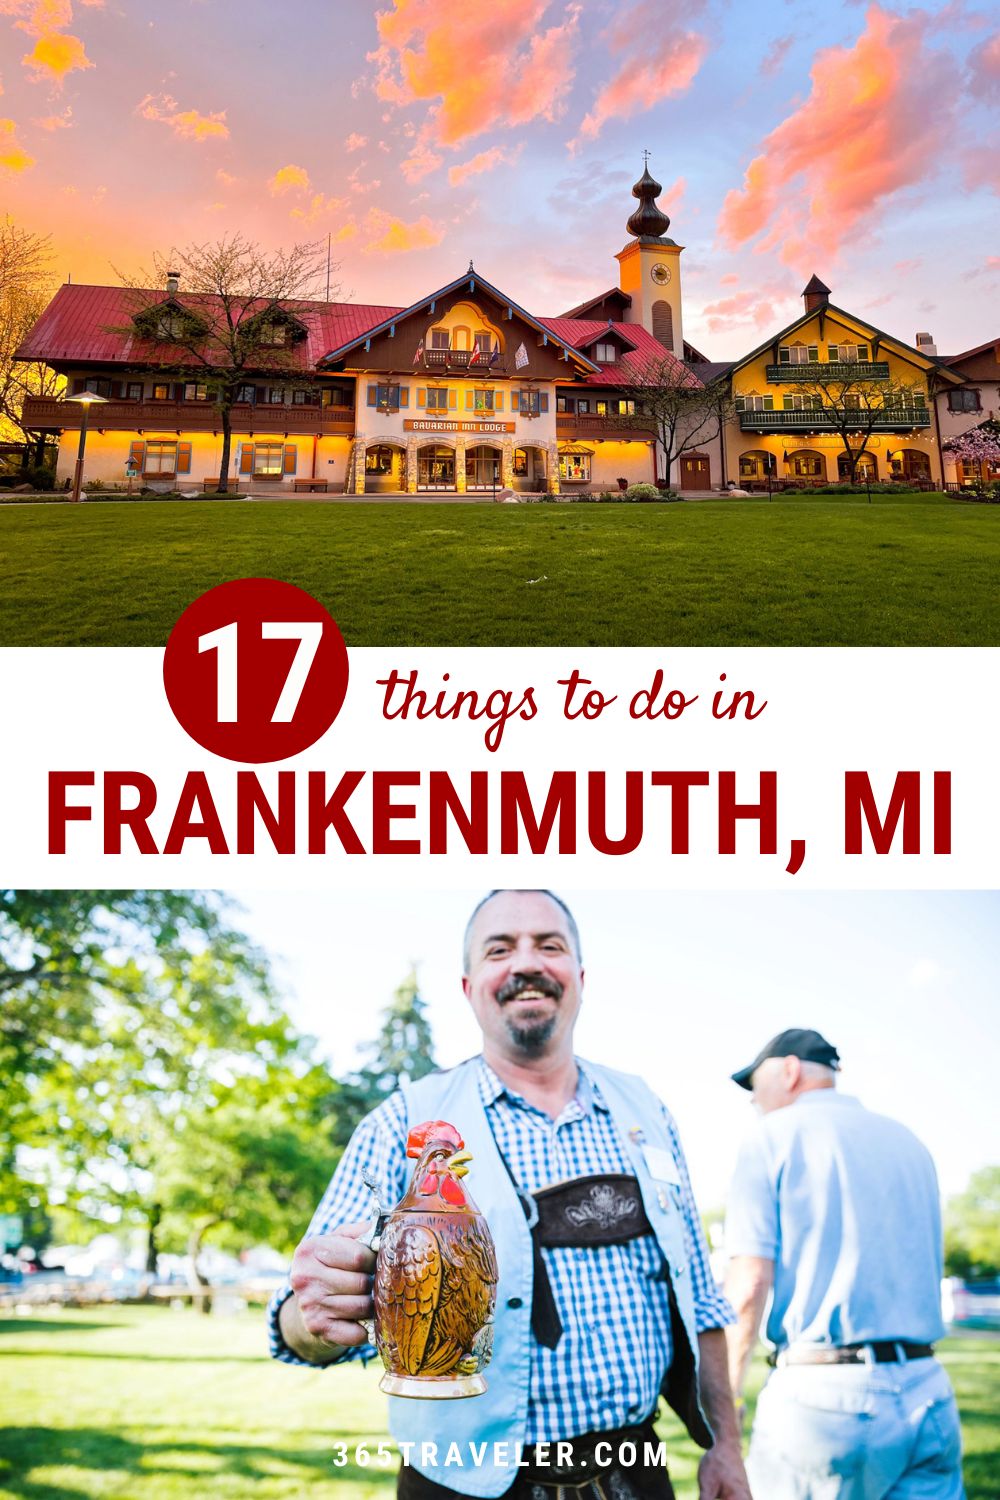 17 AMAZING THINGS TO DO IN FRANKENMUTH, MICHIGAN